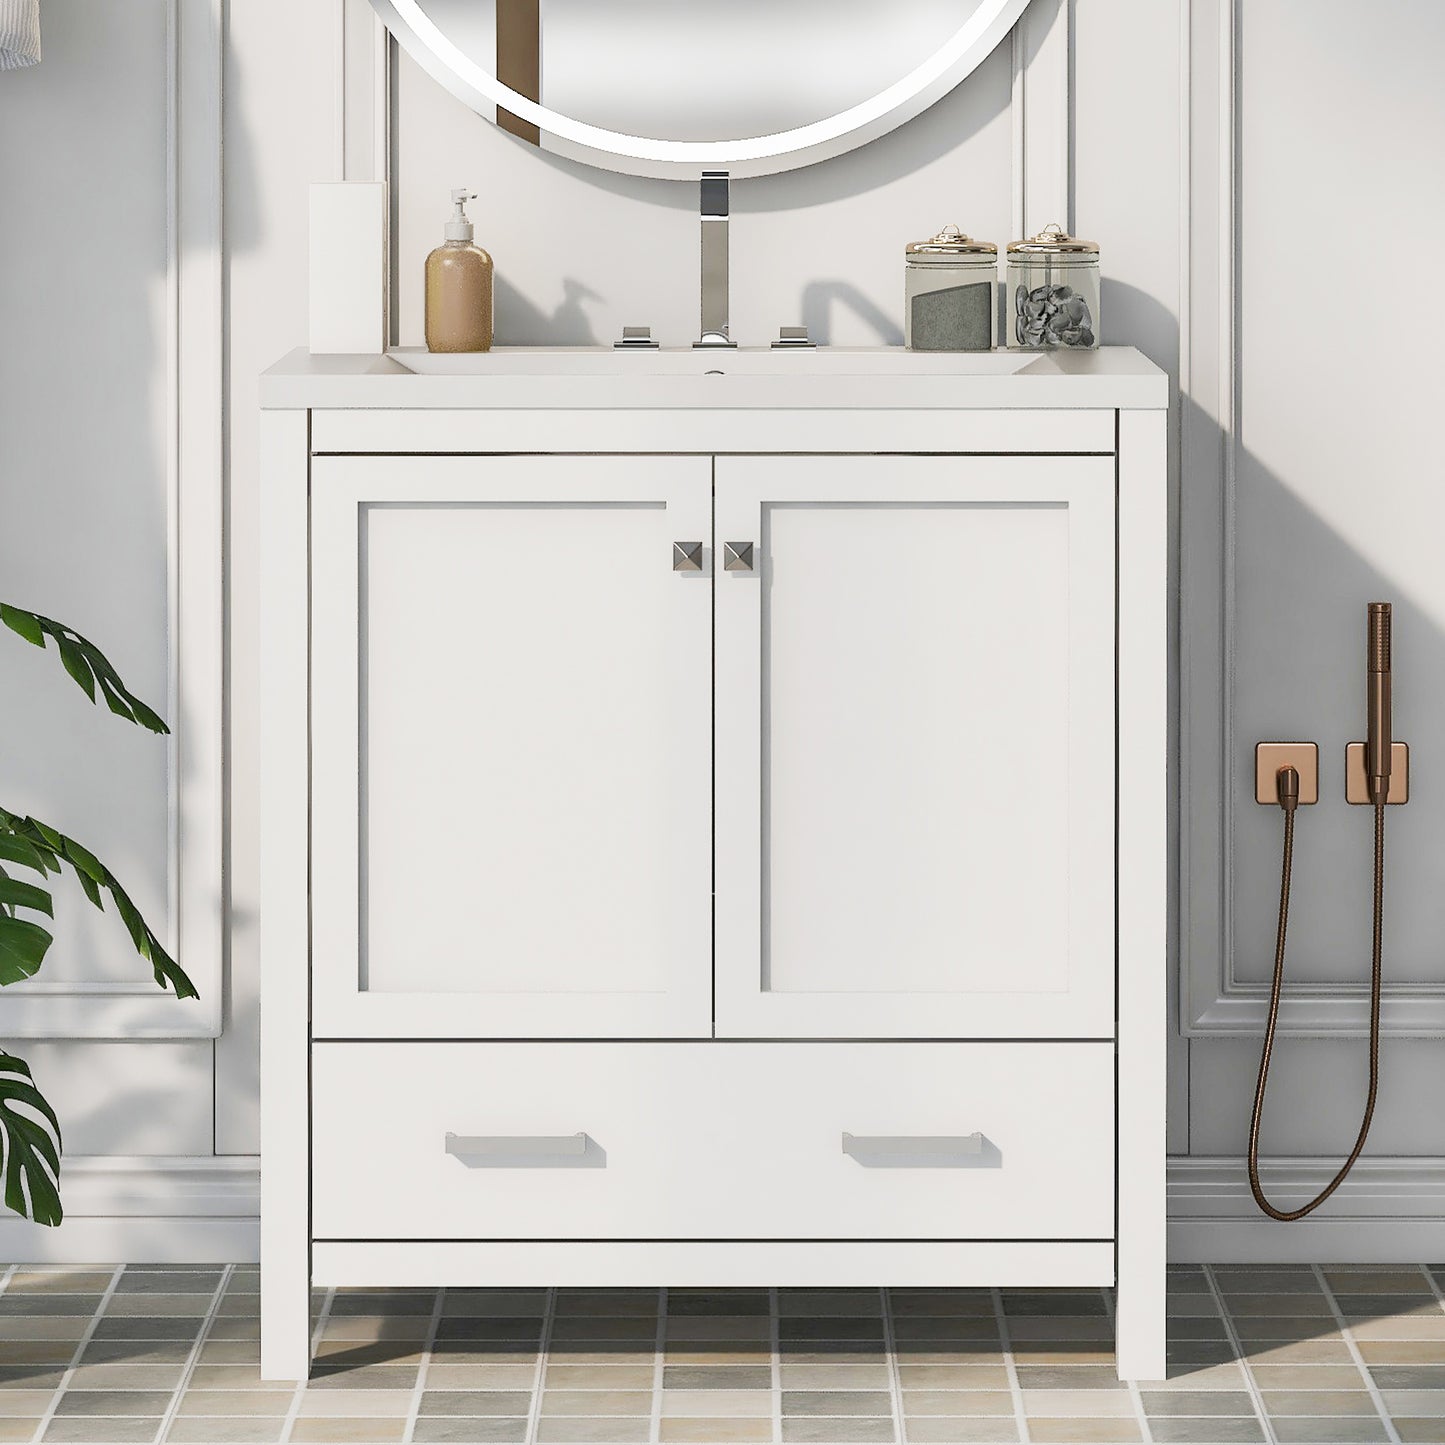 30" White Bathroom Vanity with Single Sink, Combo Cabinet Undermount Sink, Bathroom Storage Cabinet with 2 Doors and a Drawer, Soft Closing, Multifunctional Storage, Solid Wood Frame